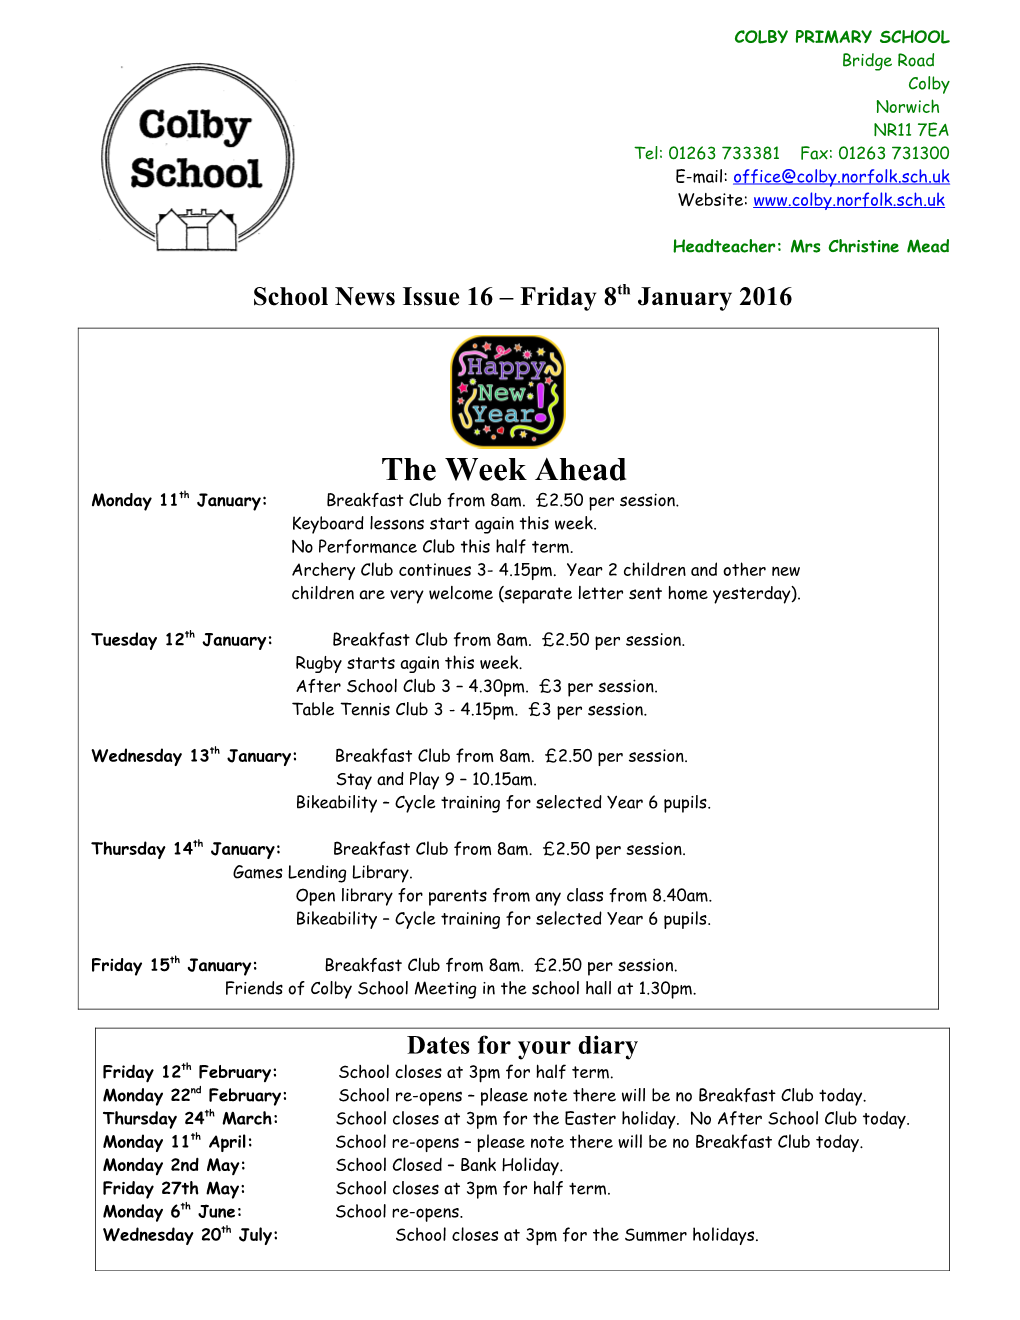 School News Issue16 Friday 8Th January 2016